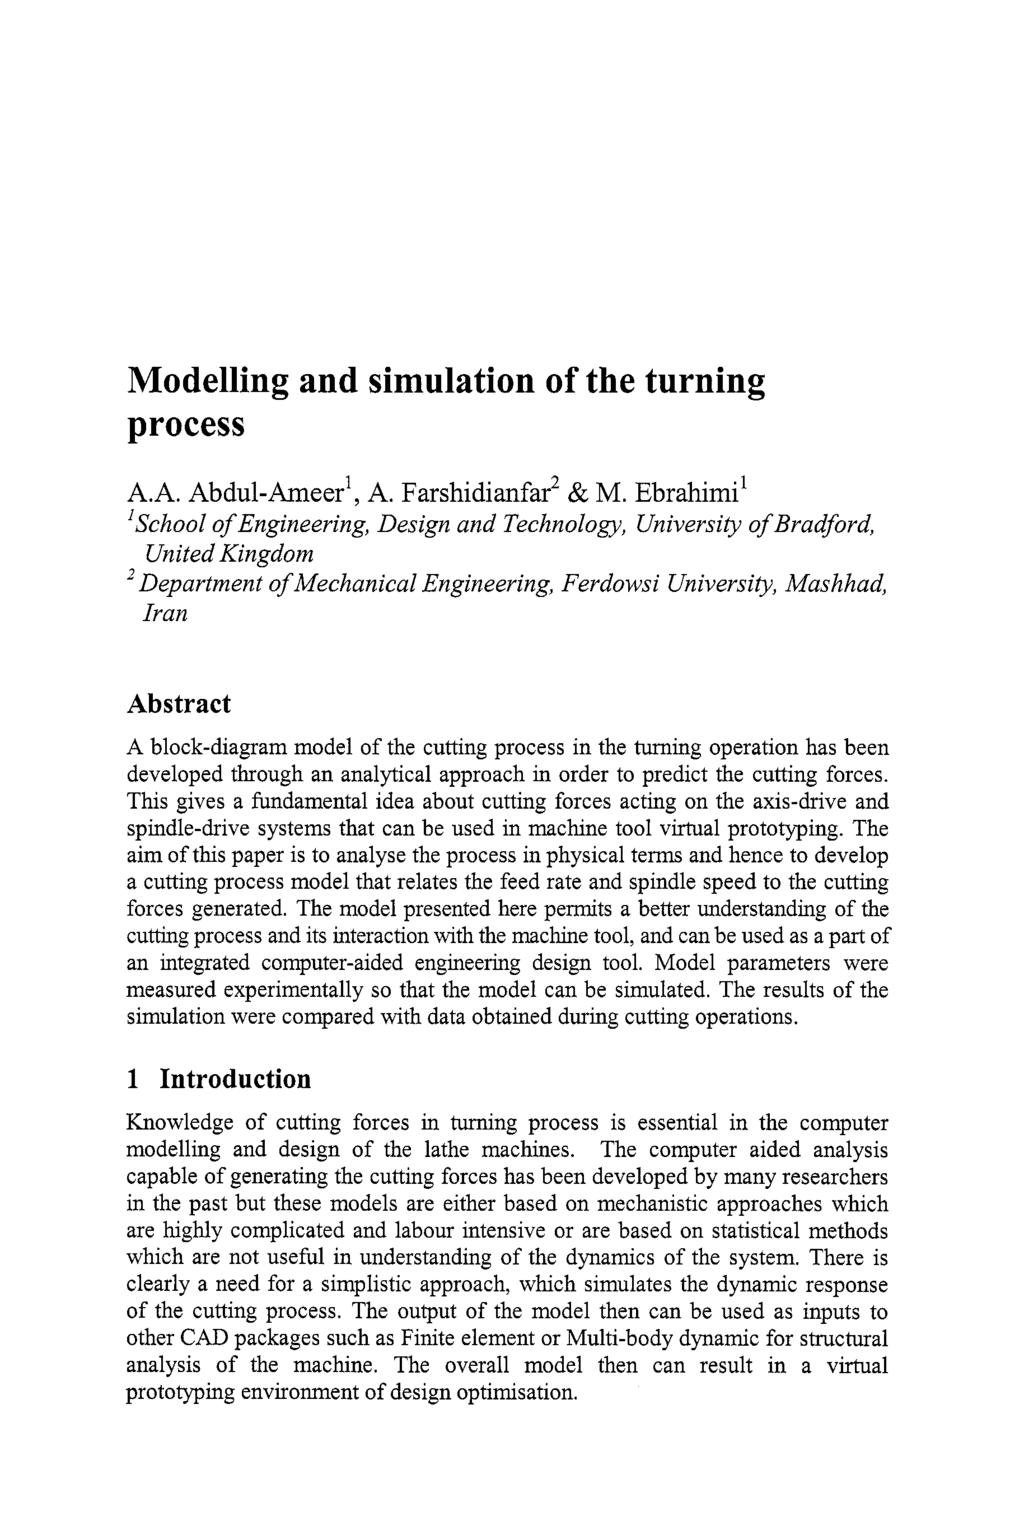 Modelling and simulation of the turning process A.A. ~bdul- mee er', A. ~arshidianfar~ & M.